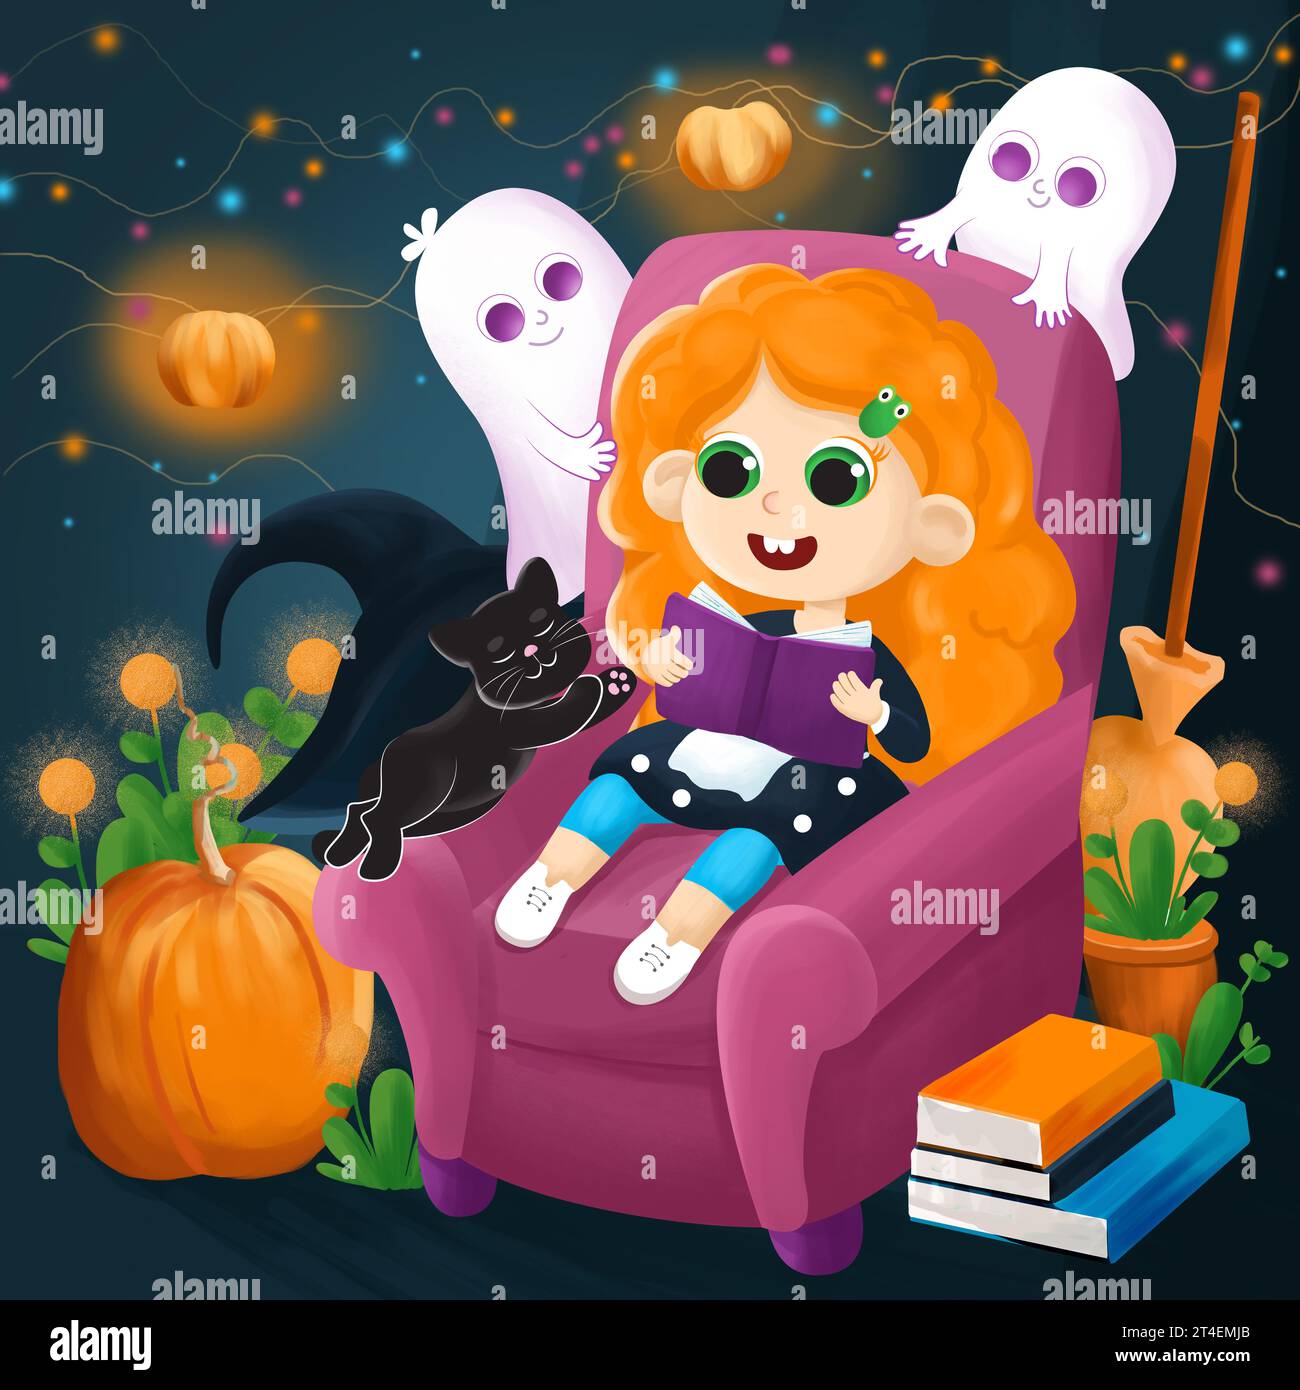 A little witch is sitting on a chair and reading a book. Next to her is a black cat and two ghosts, as well as pumpkins. Halloween illustration. Stock Photo